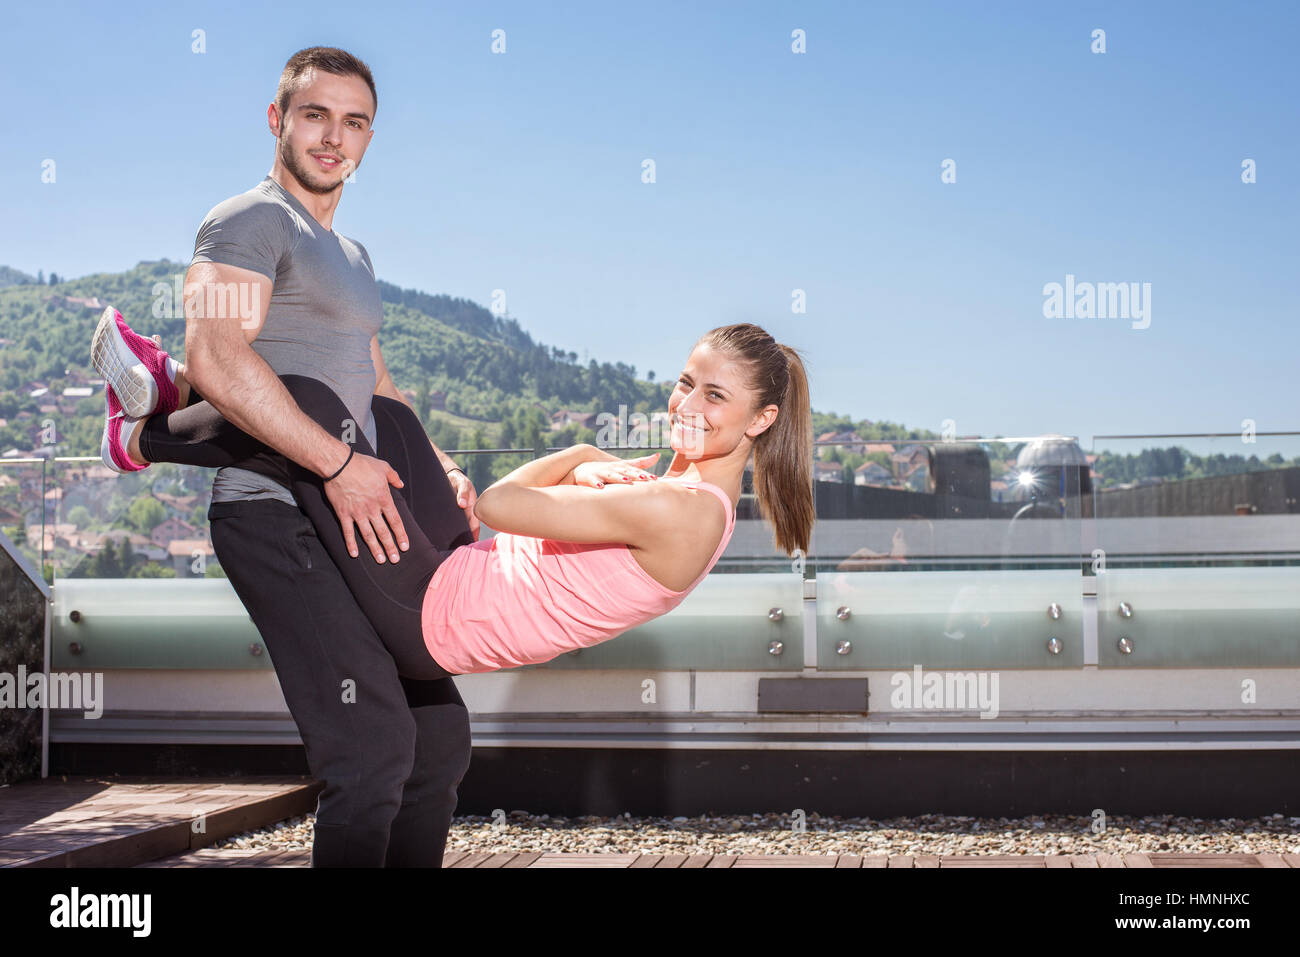 Young attractive couple doing advanced double dare crunches while standing on rooftop of the building in urban area. Stock Photo